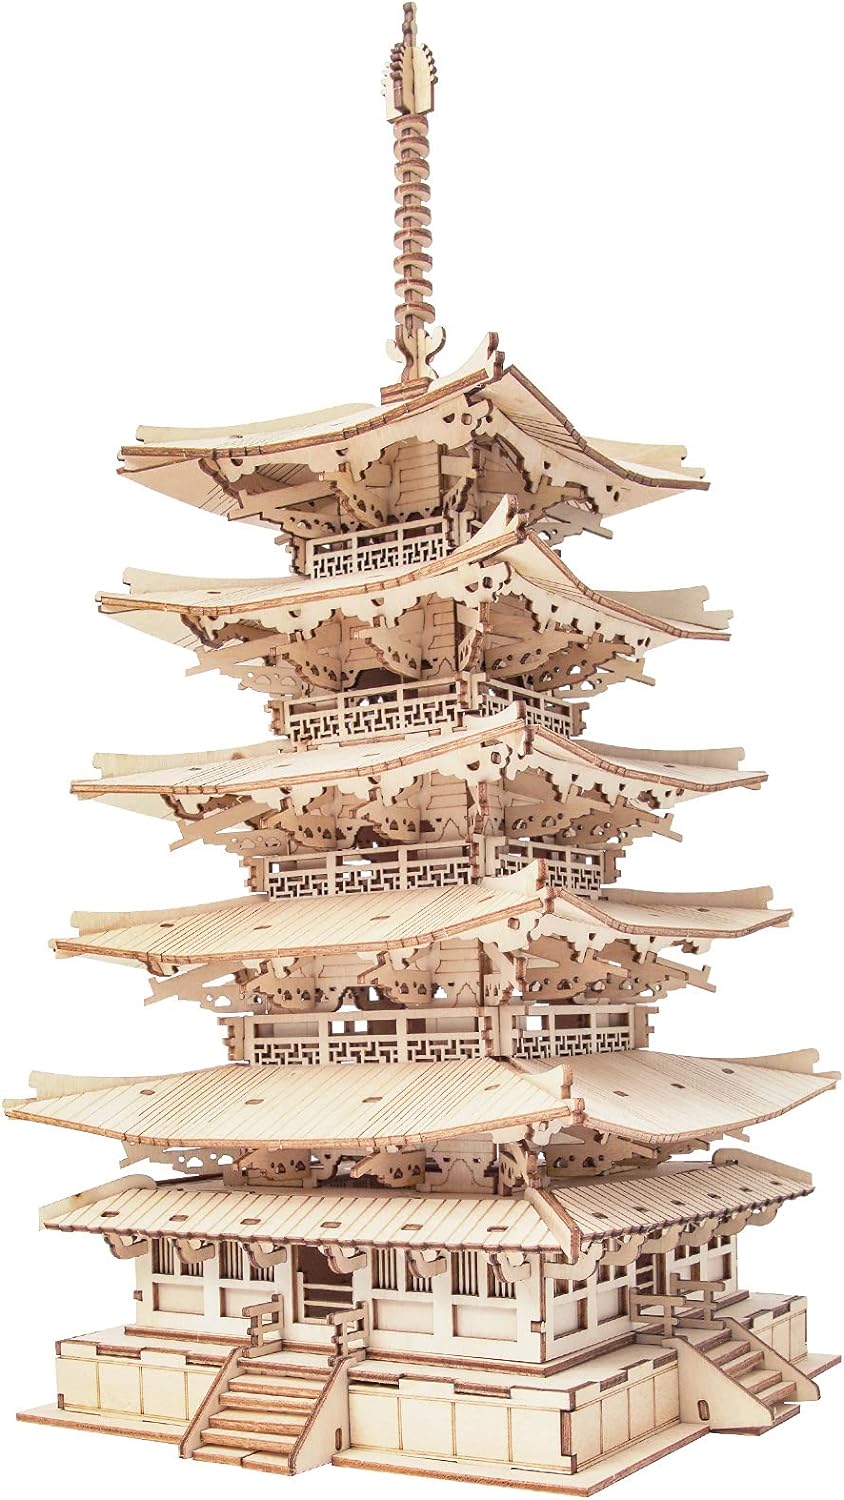 Rolife 3D Wooden Puzzles Temple Building Kit - 275PCS Japanese Five-storied Pagoda 13 Model Craft Kits for Adults/Boys/Girls